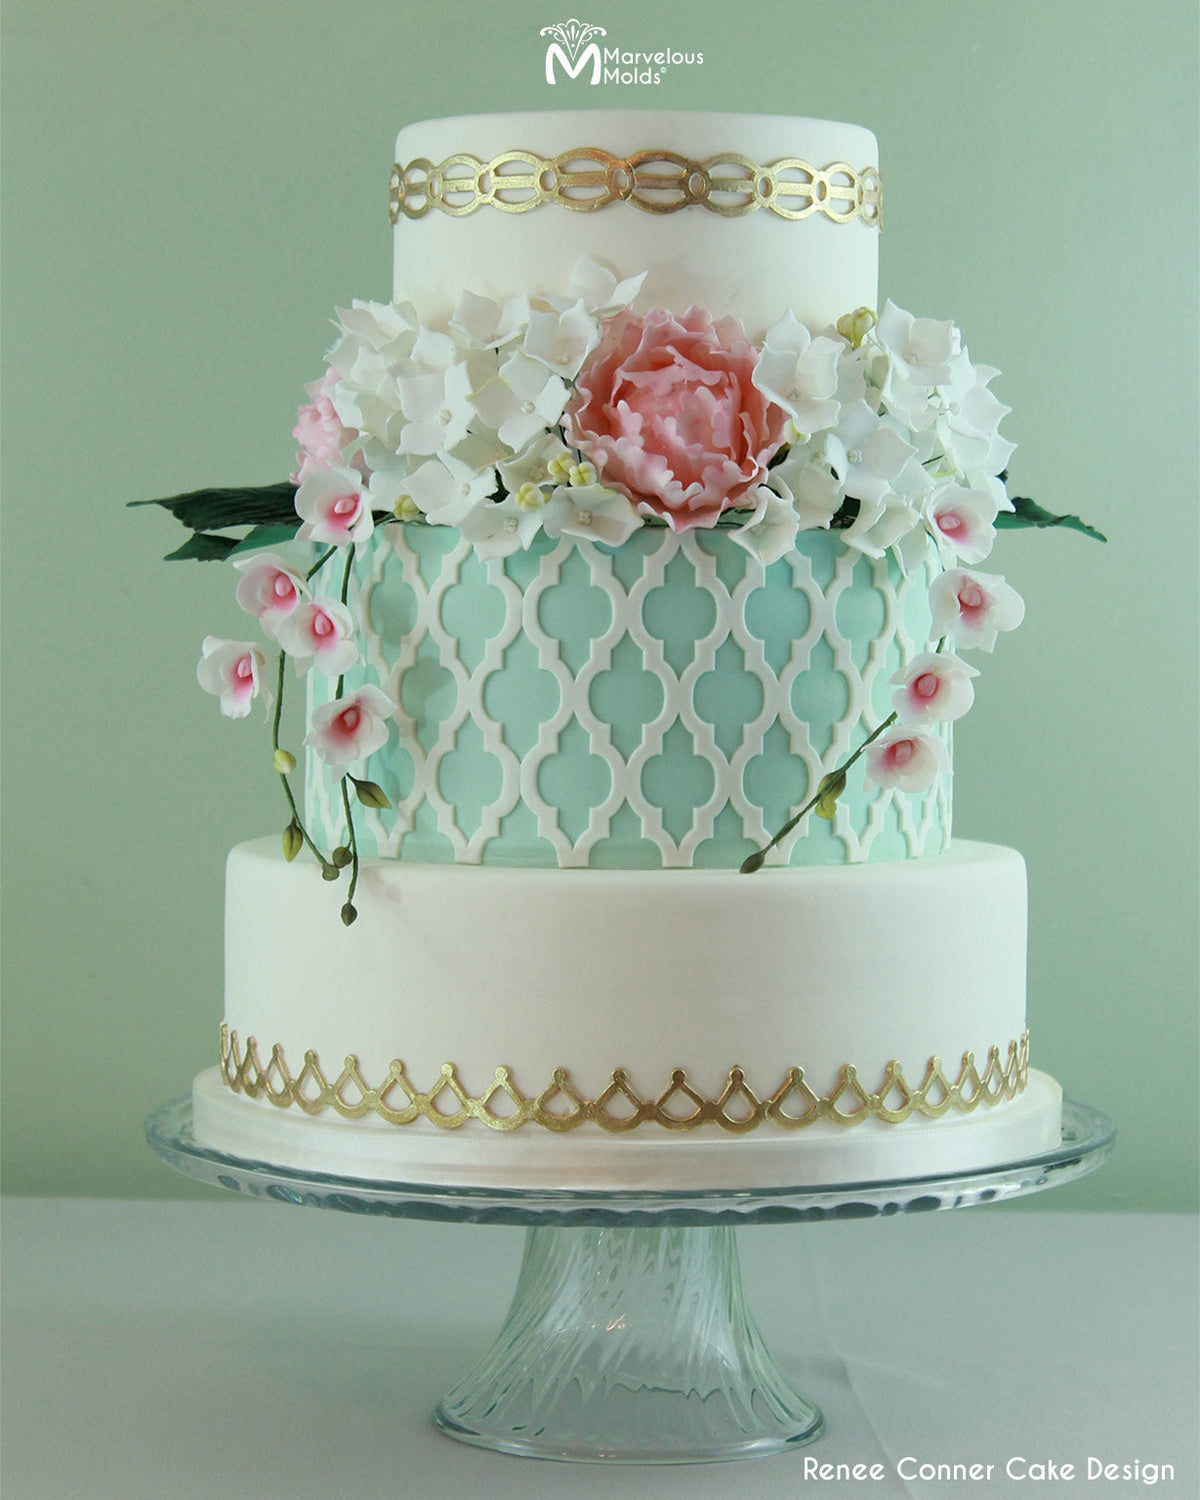 White and Pastel Mint Cake with a Gold Border Decorated using the Marvelous Molds Moroccan Lattice Silicone Onlay